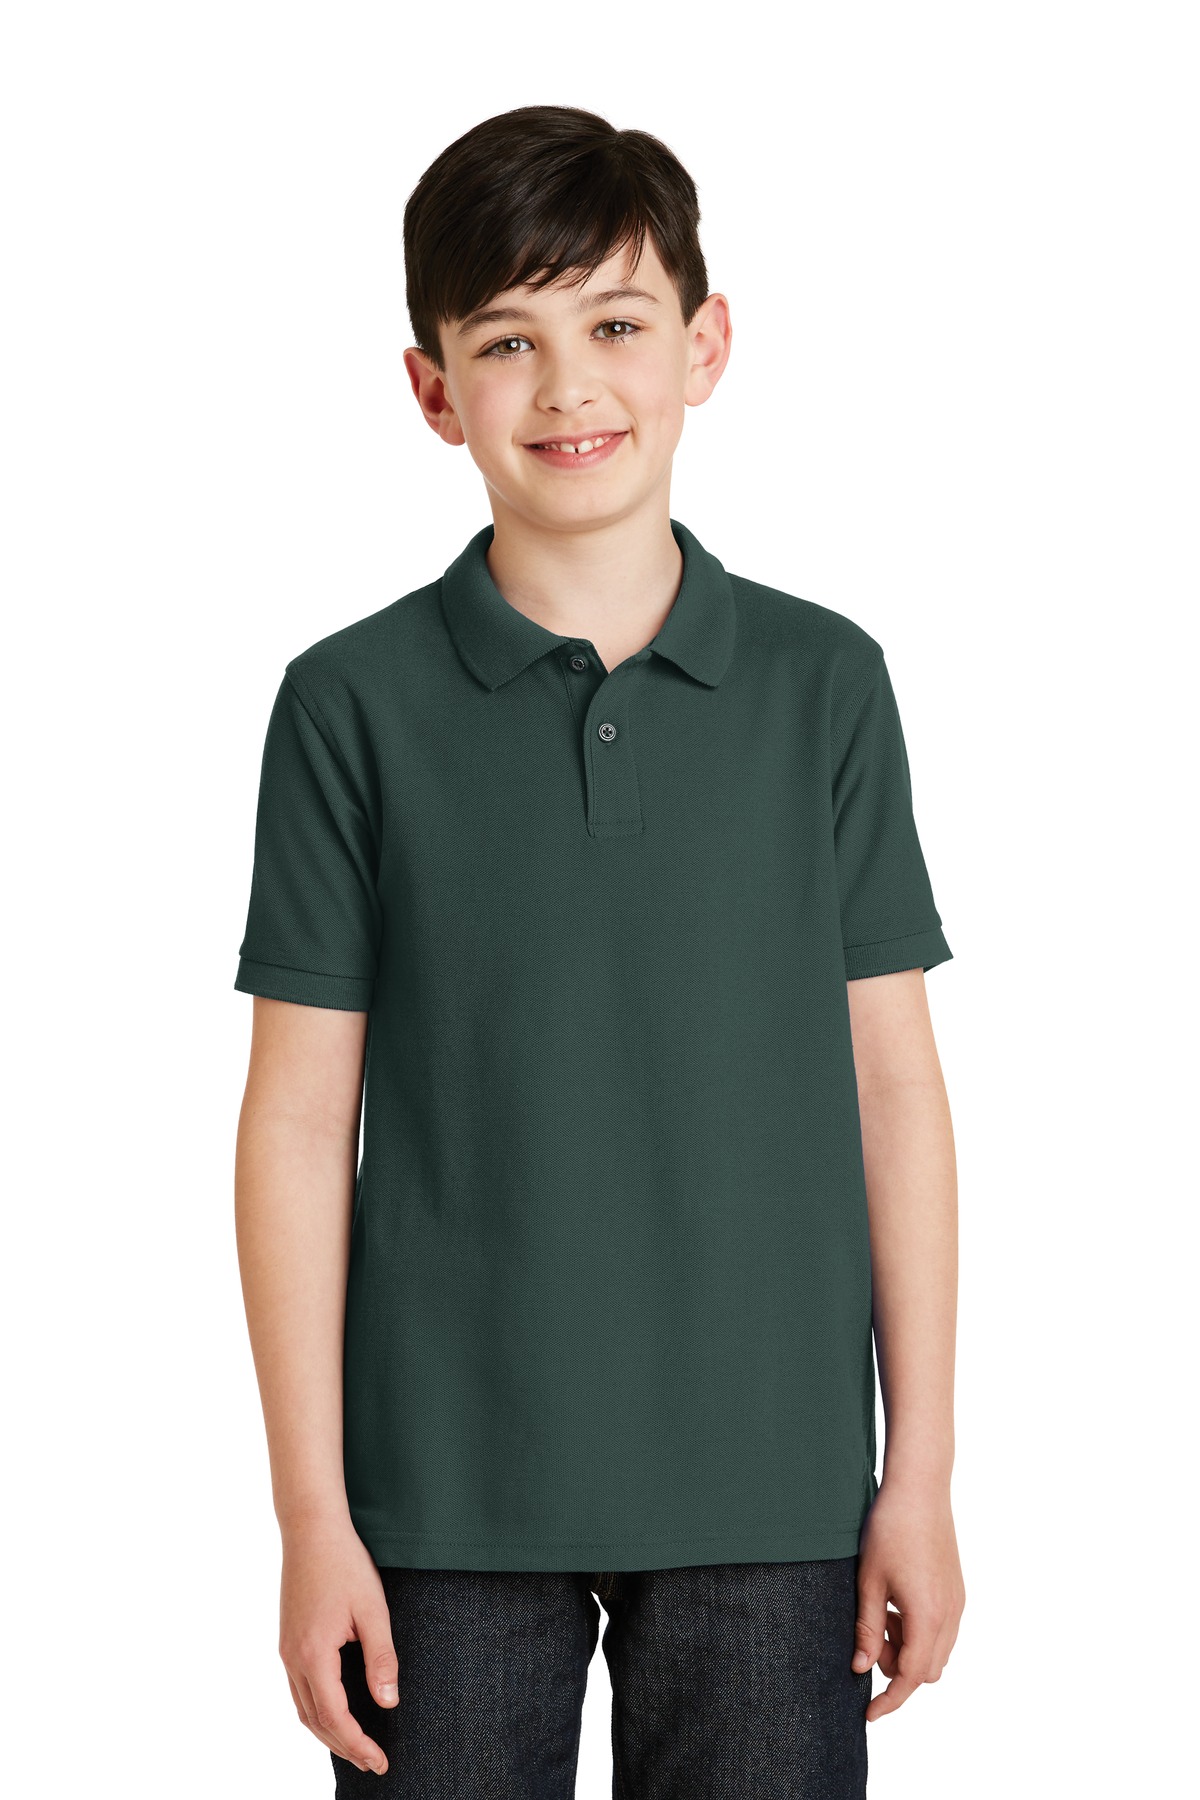 Y500 Logo embroidered Youth Silk Touch Polo